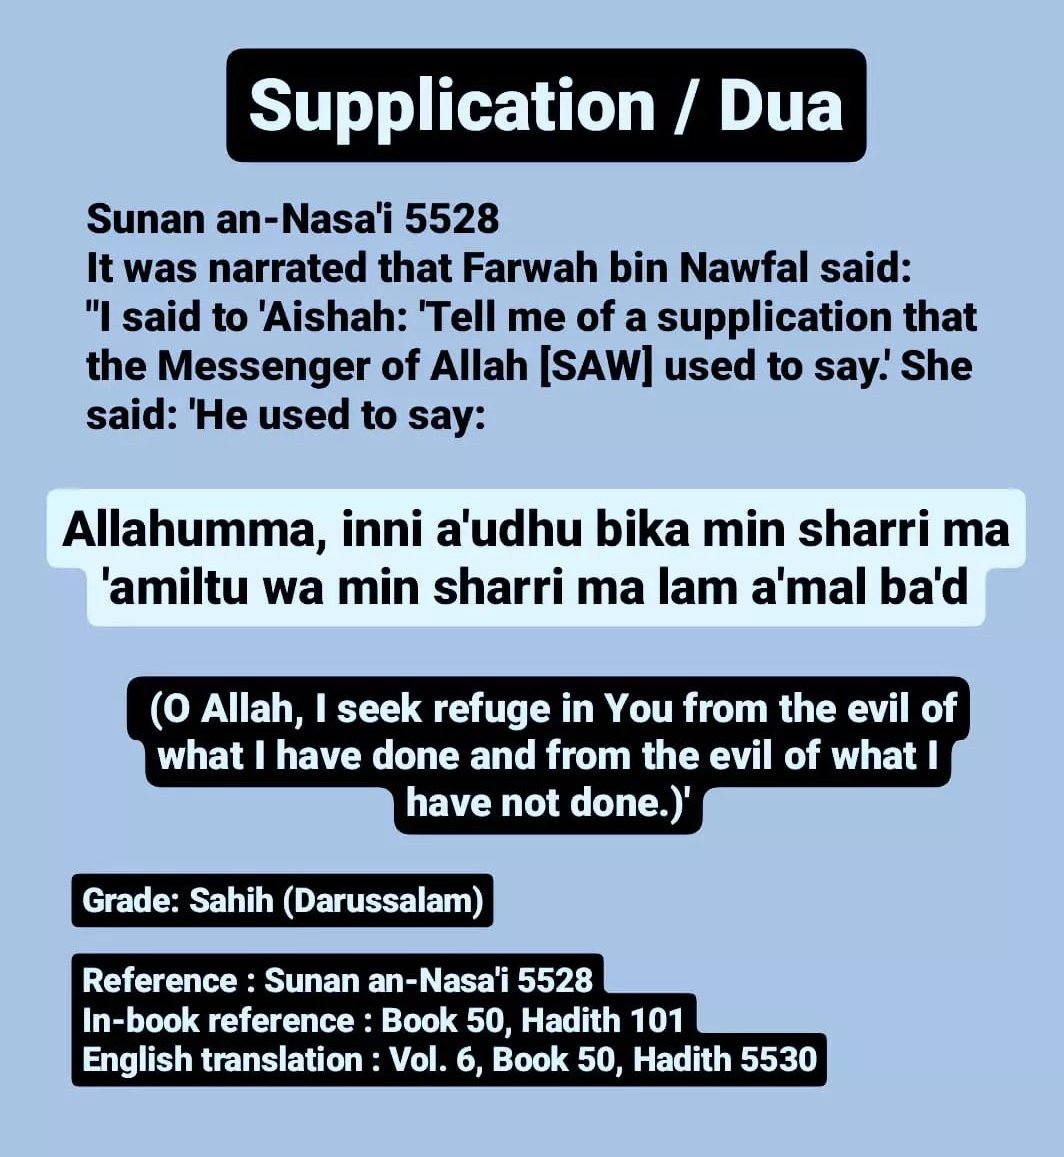 Add this Dua in your list